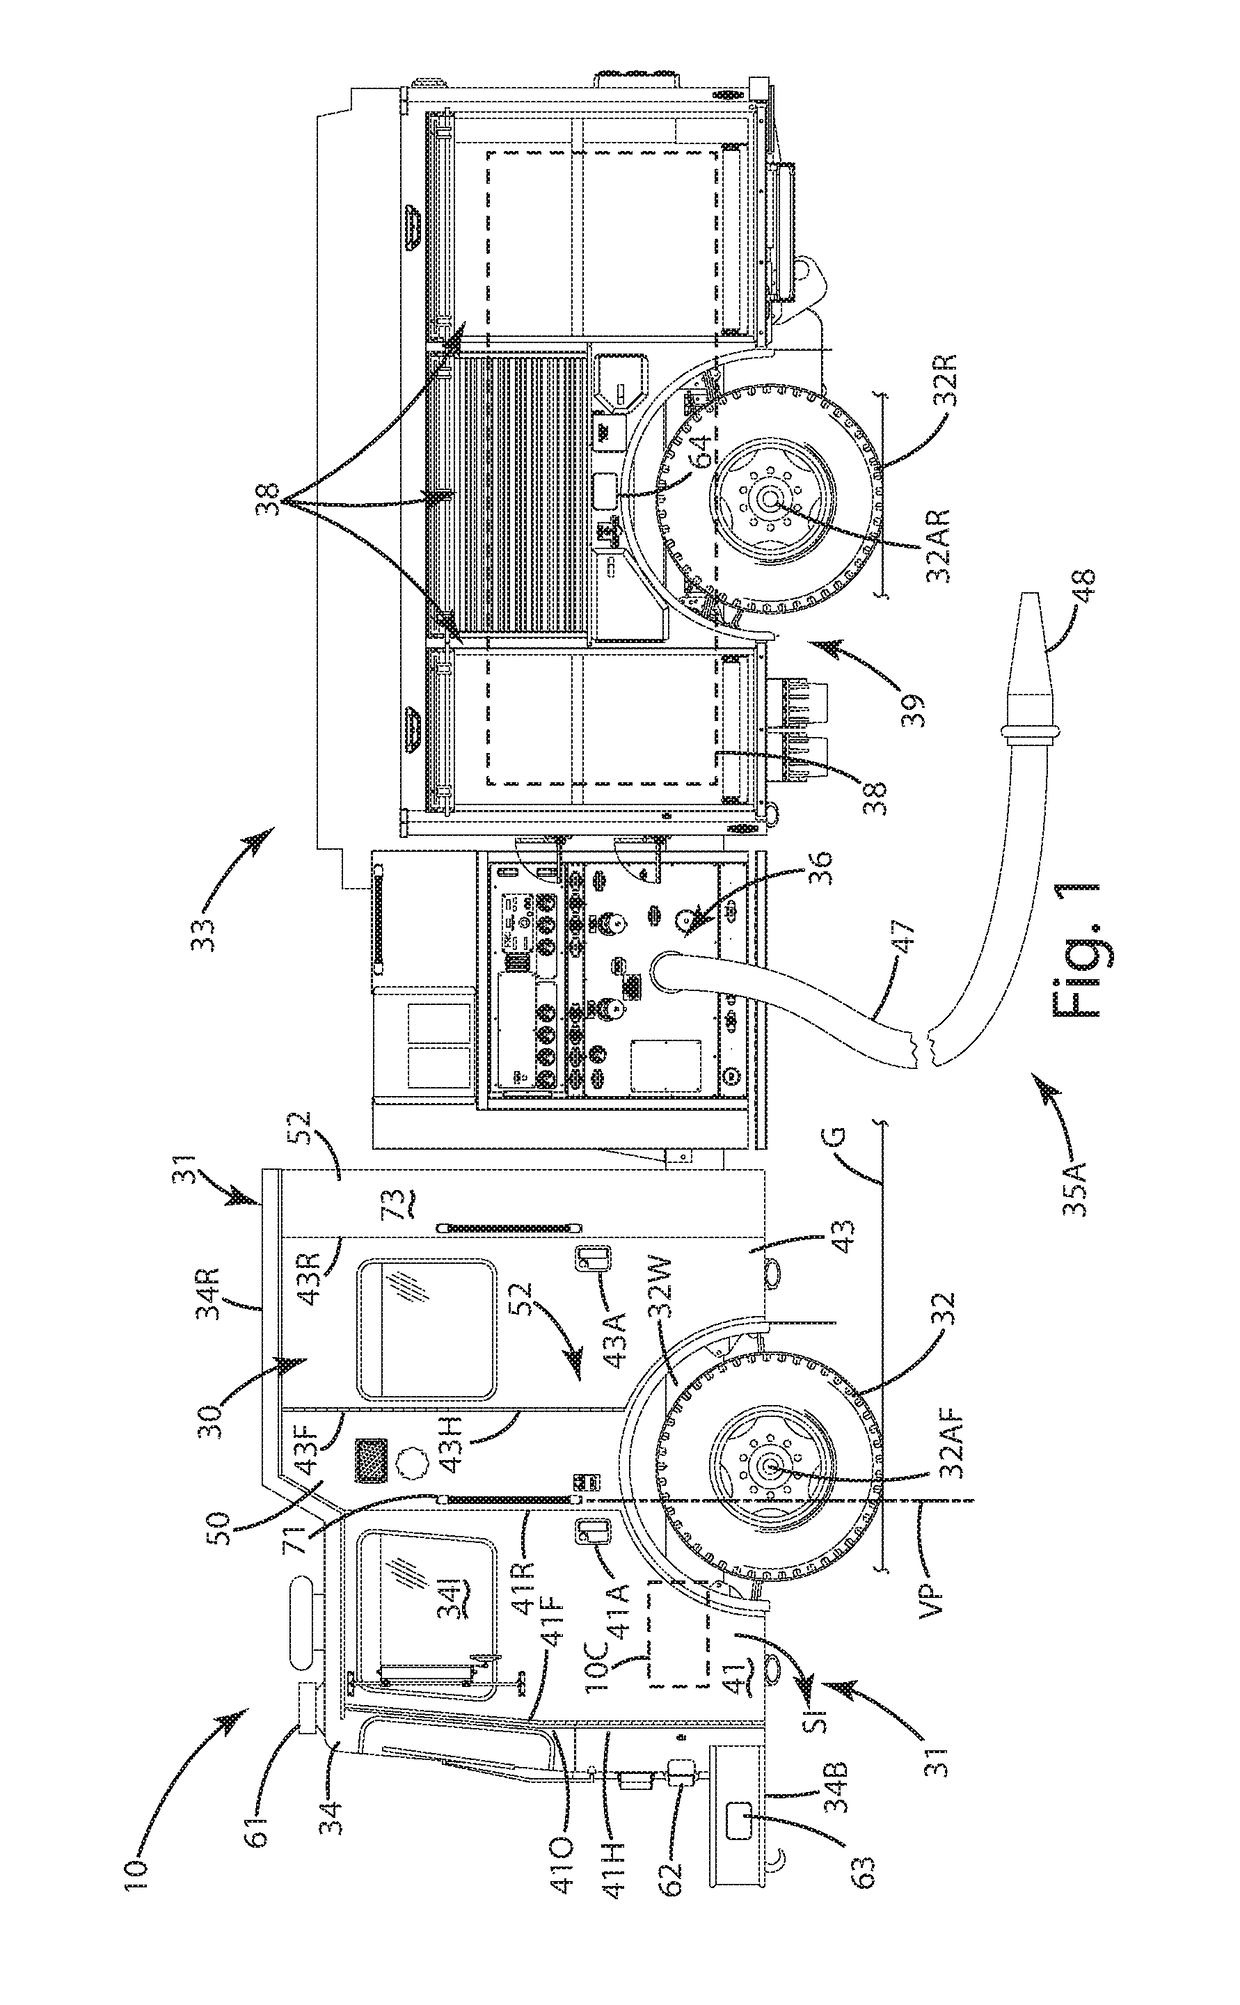 Firefighting or rescue apparatus including an integrated grab handle and signal light